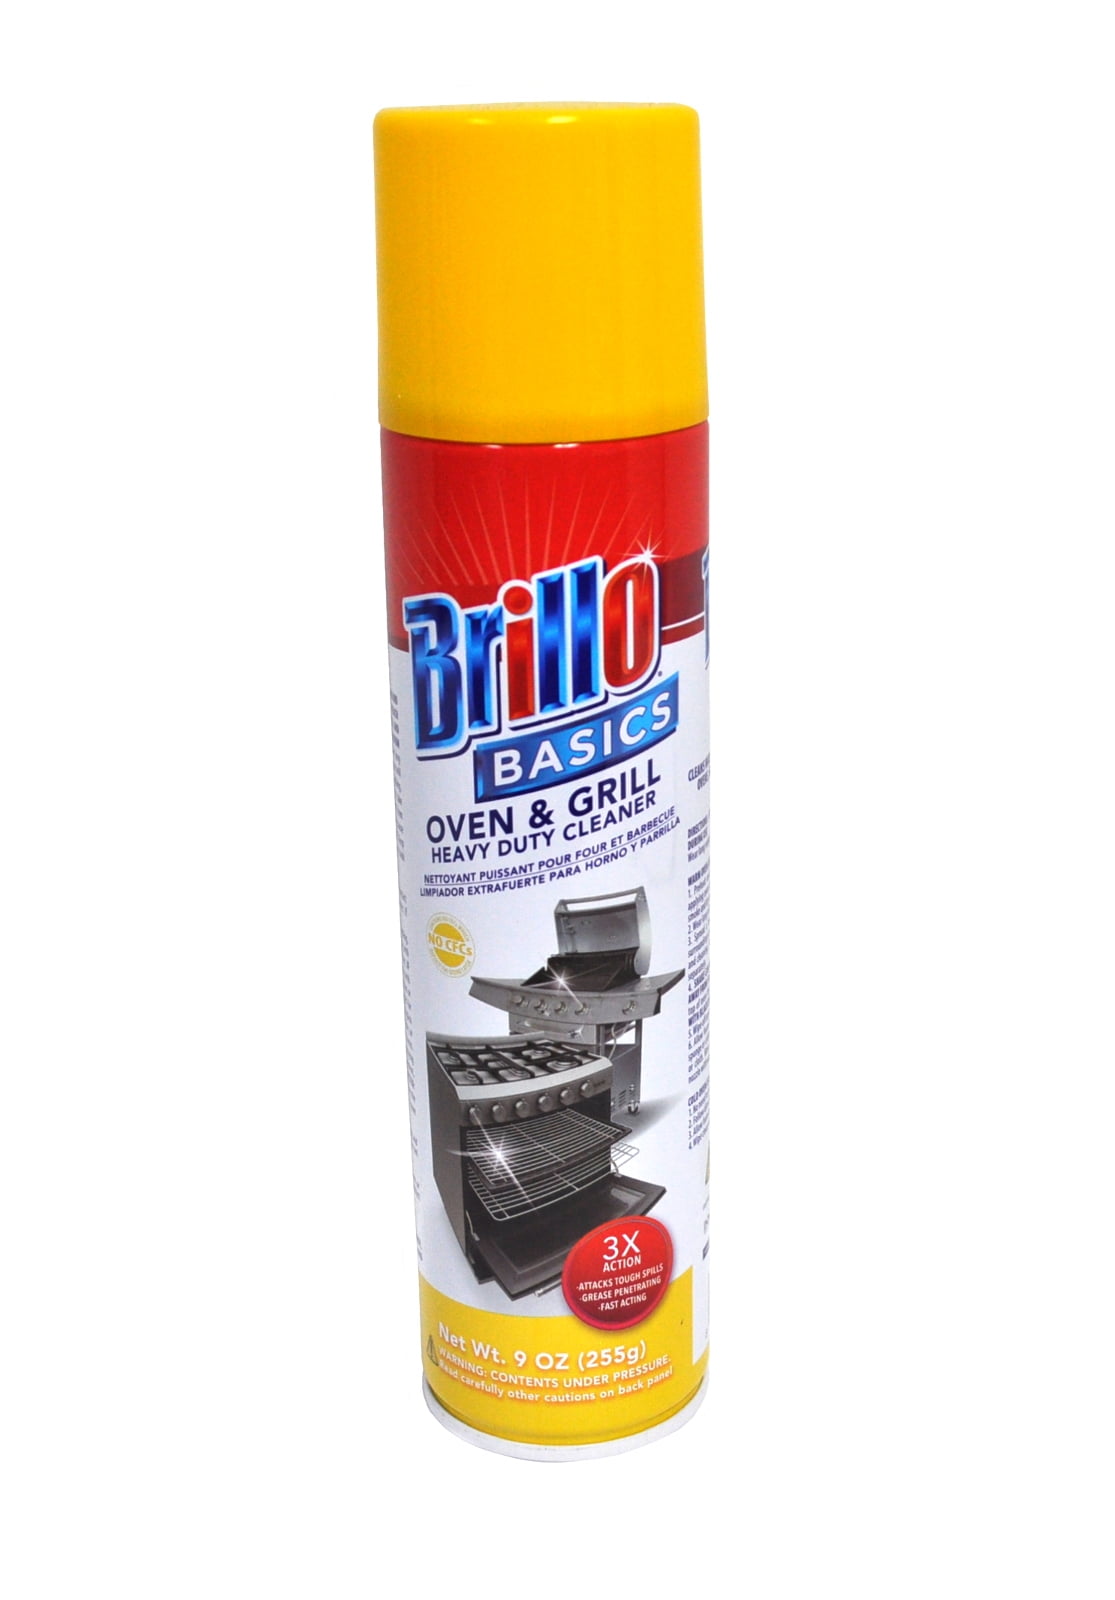 Misty Oven u0026 Grill Cleaner Refill Citrus 128 oz 4 ct Size: Size 1